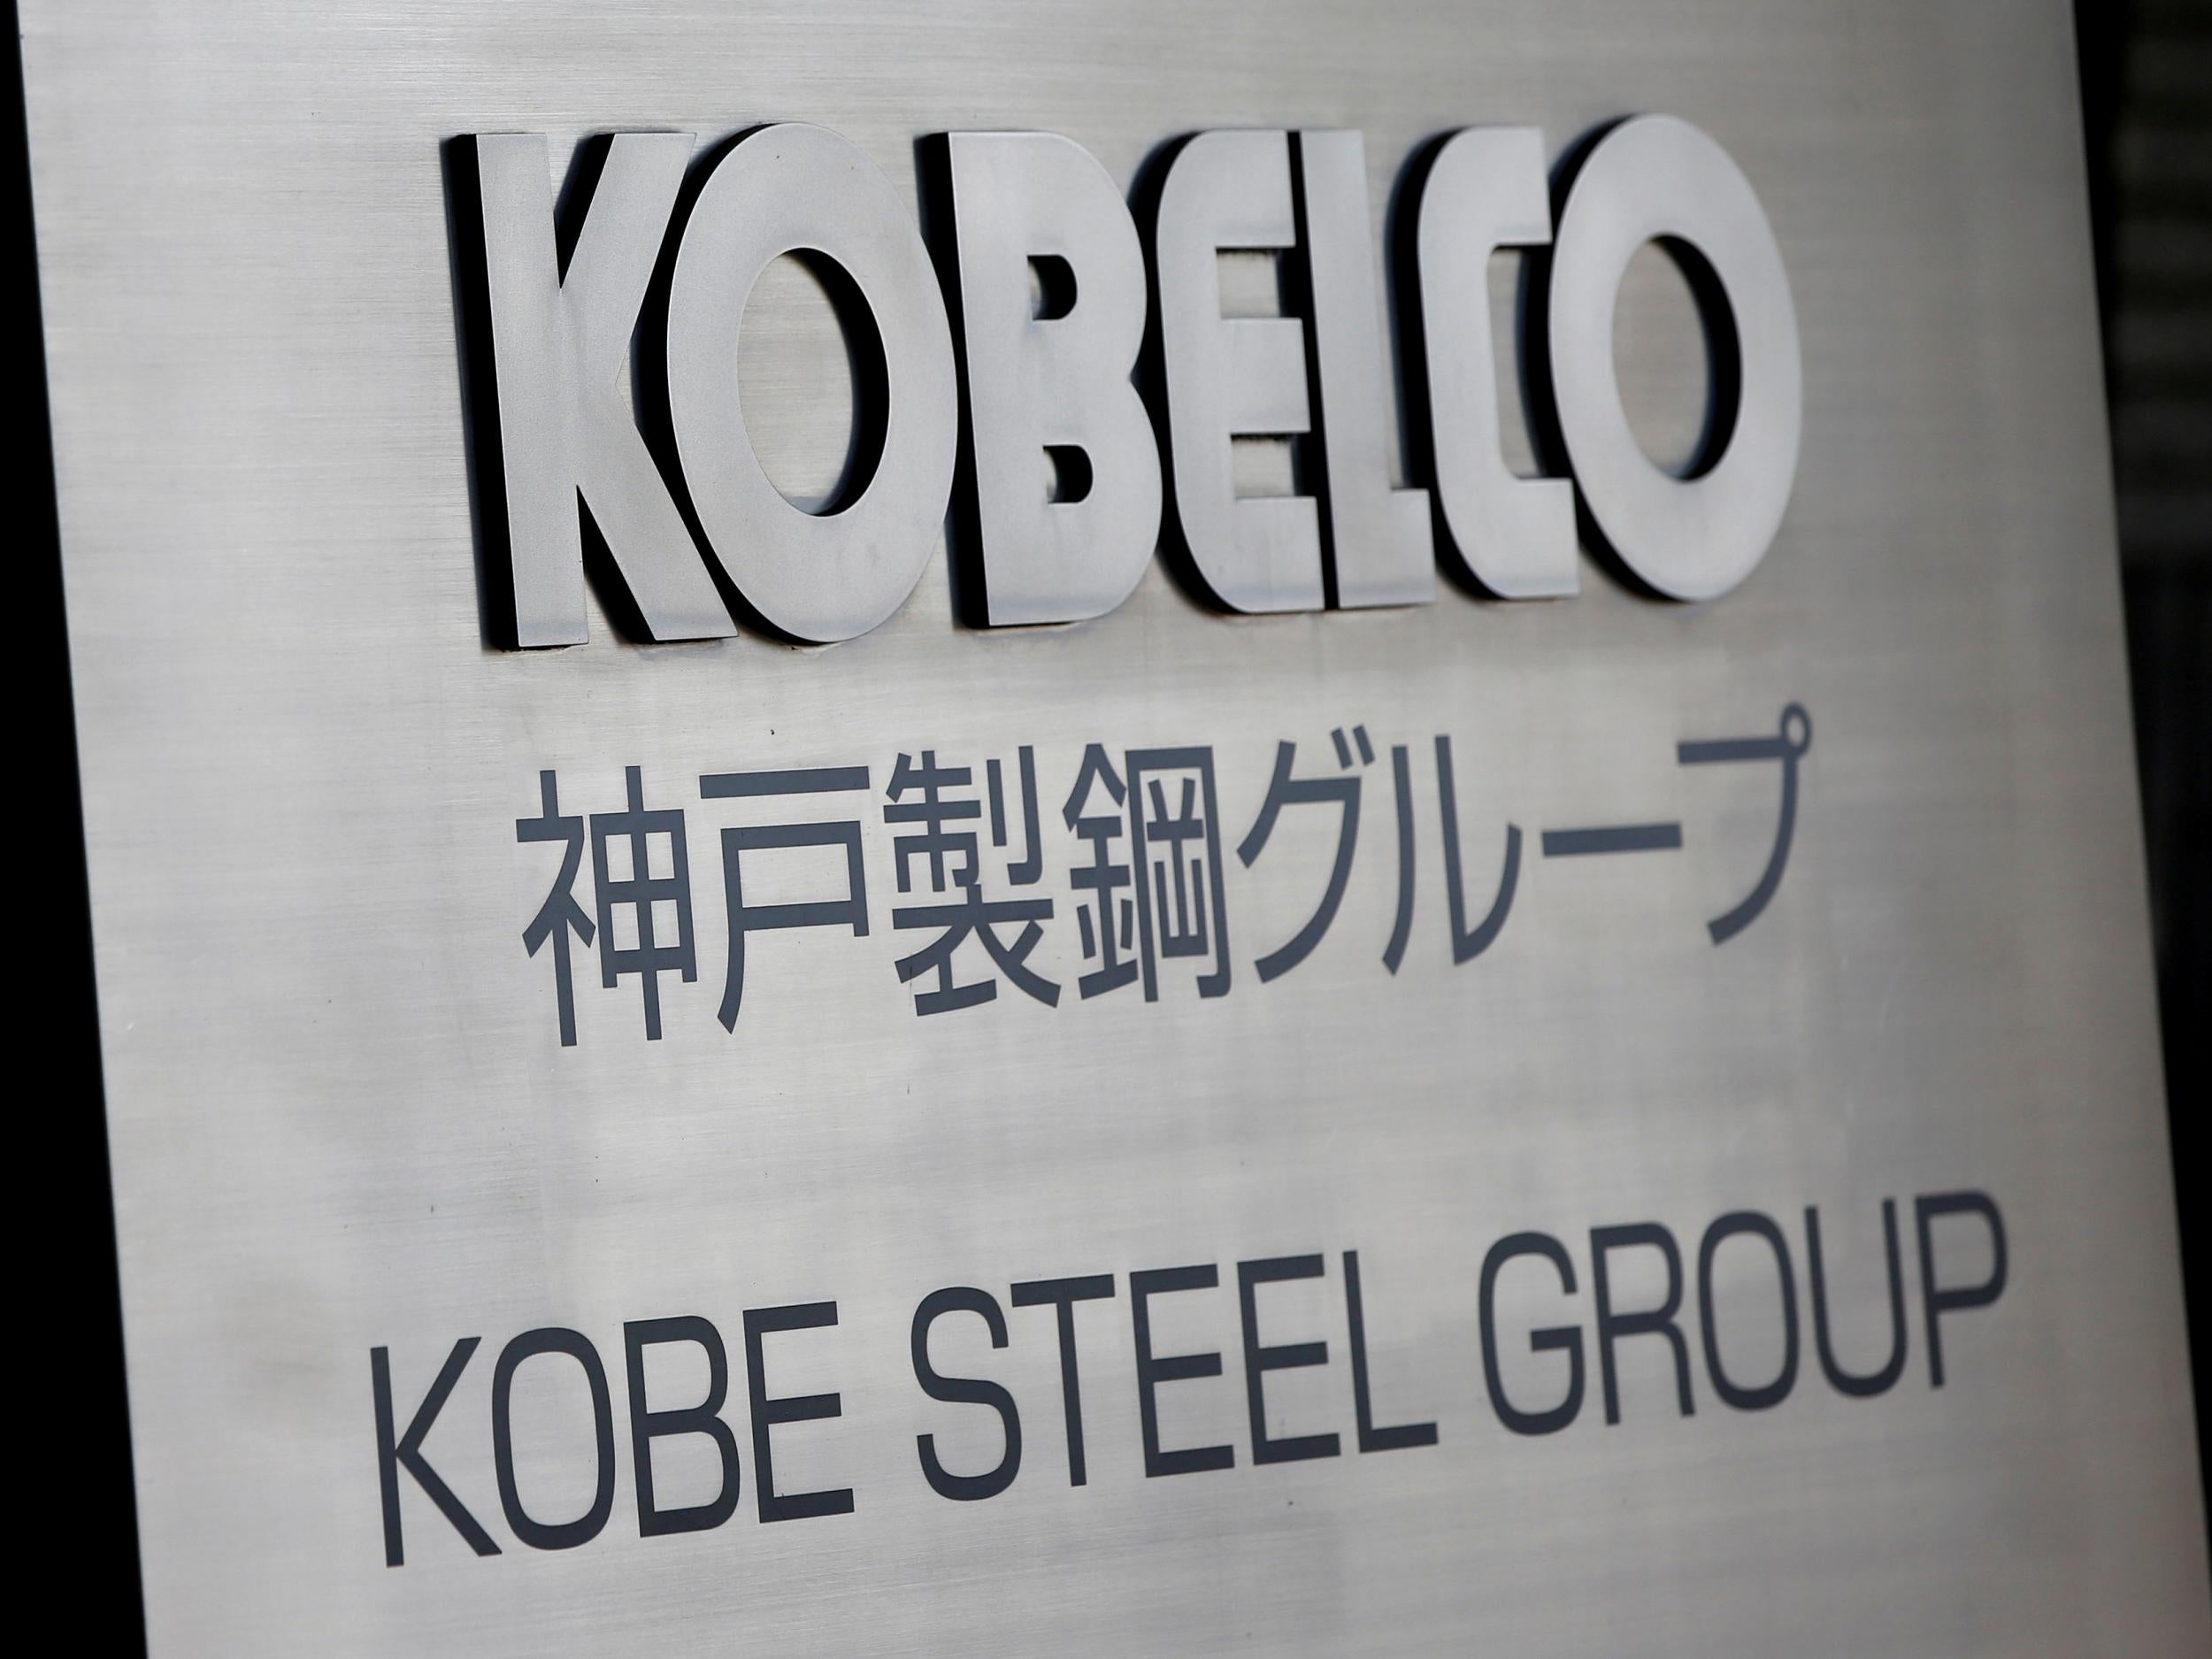 Kobe Steel is a major supplier to aircraft manufacturers around the world